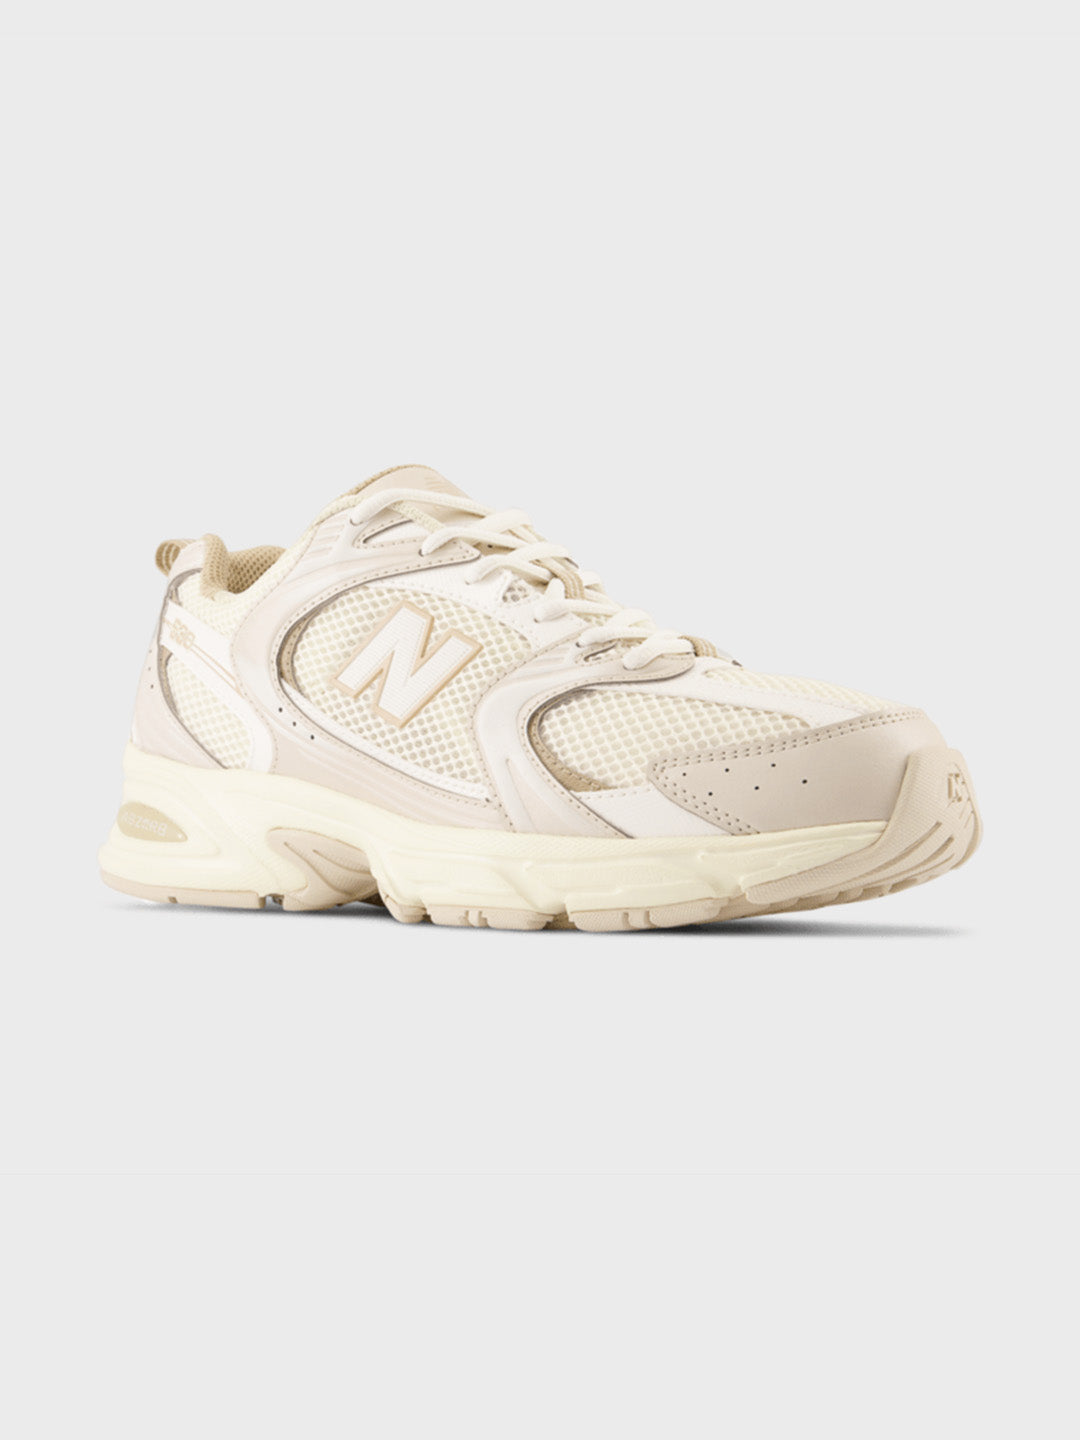 new balance sneakers 530